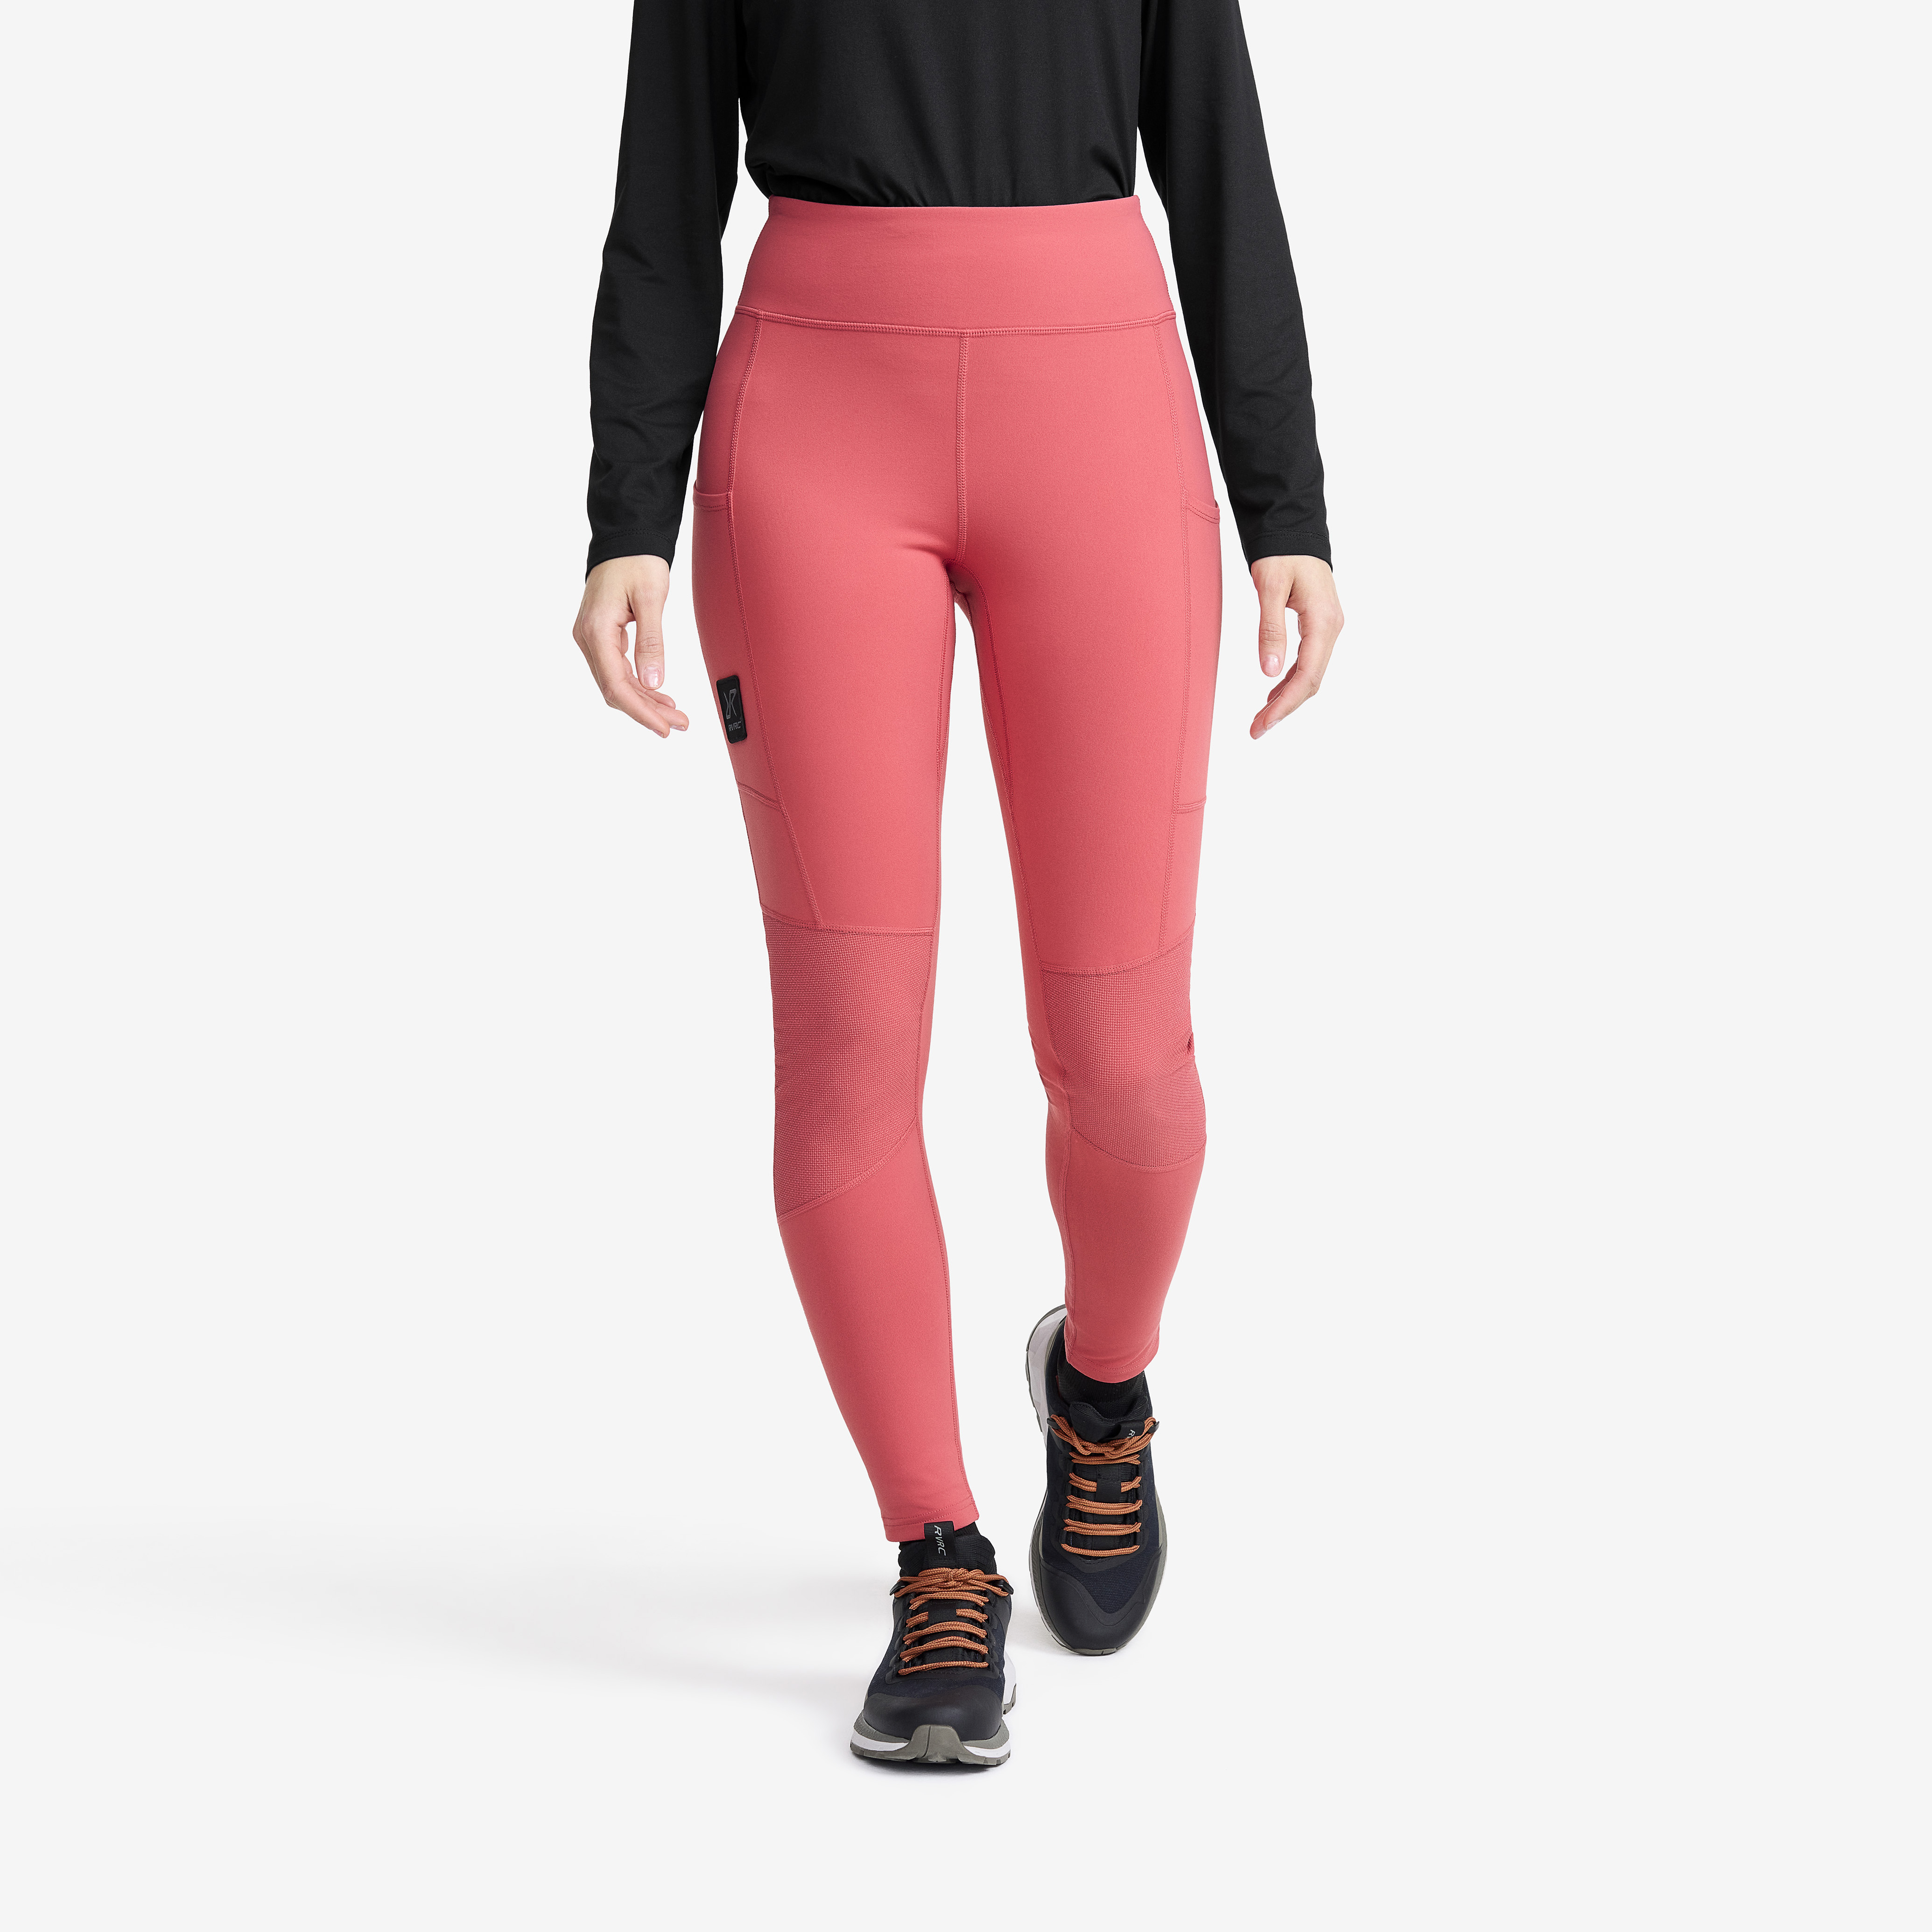 Summit Core Tights – Dam – Holly Berry Storlek:XS – Outdoor Tights